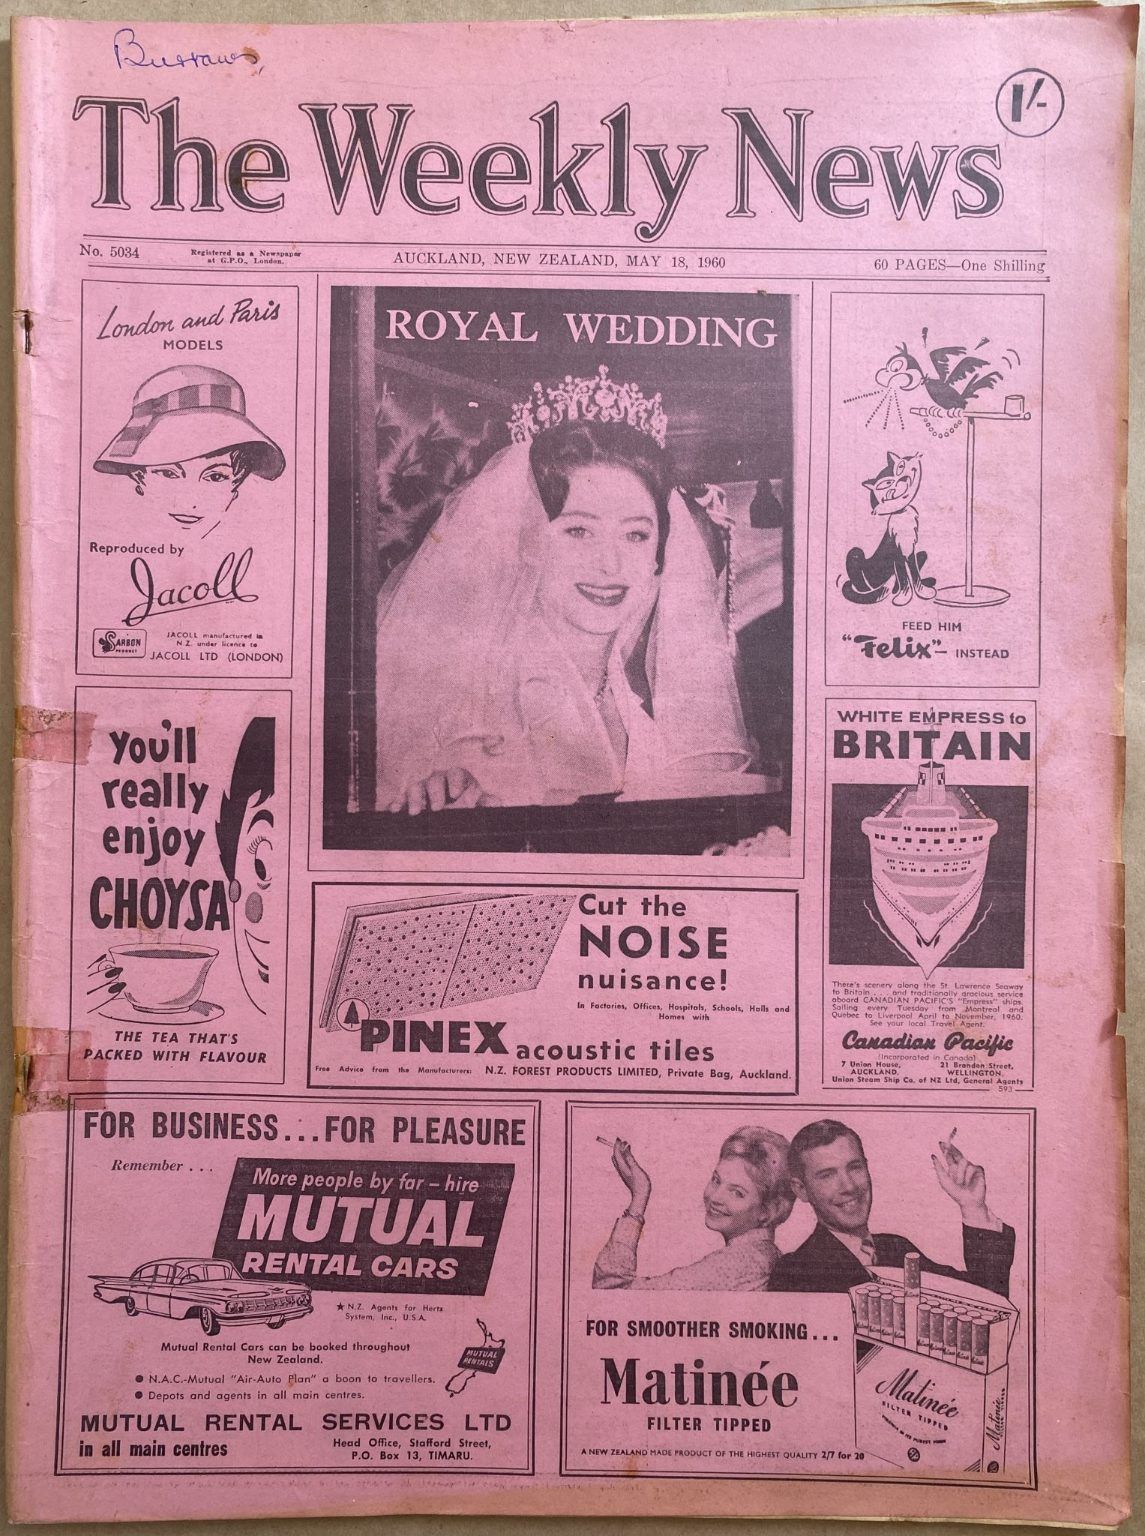 OLD NEWSPAPER: The Weekly News, No. 5034, 18 May 1960